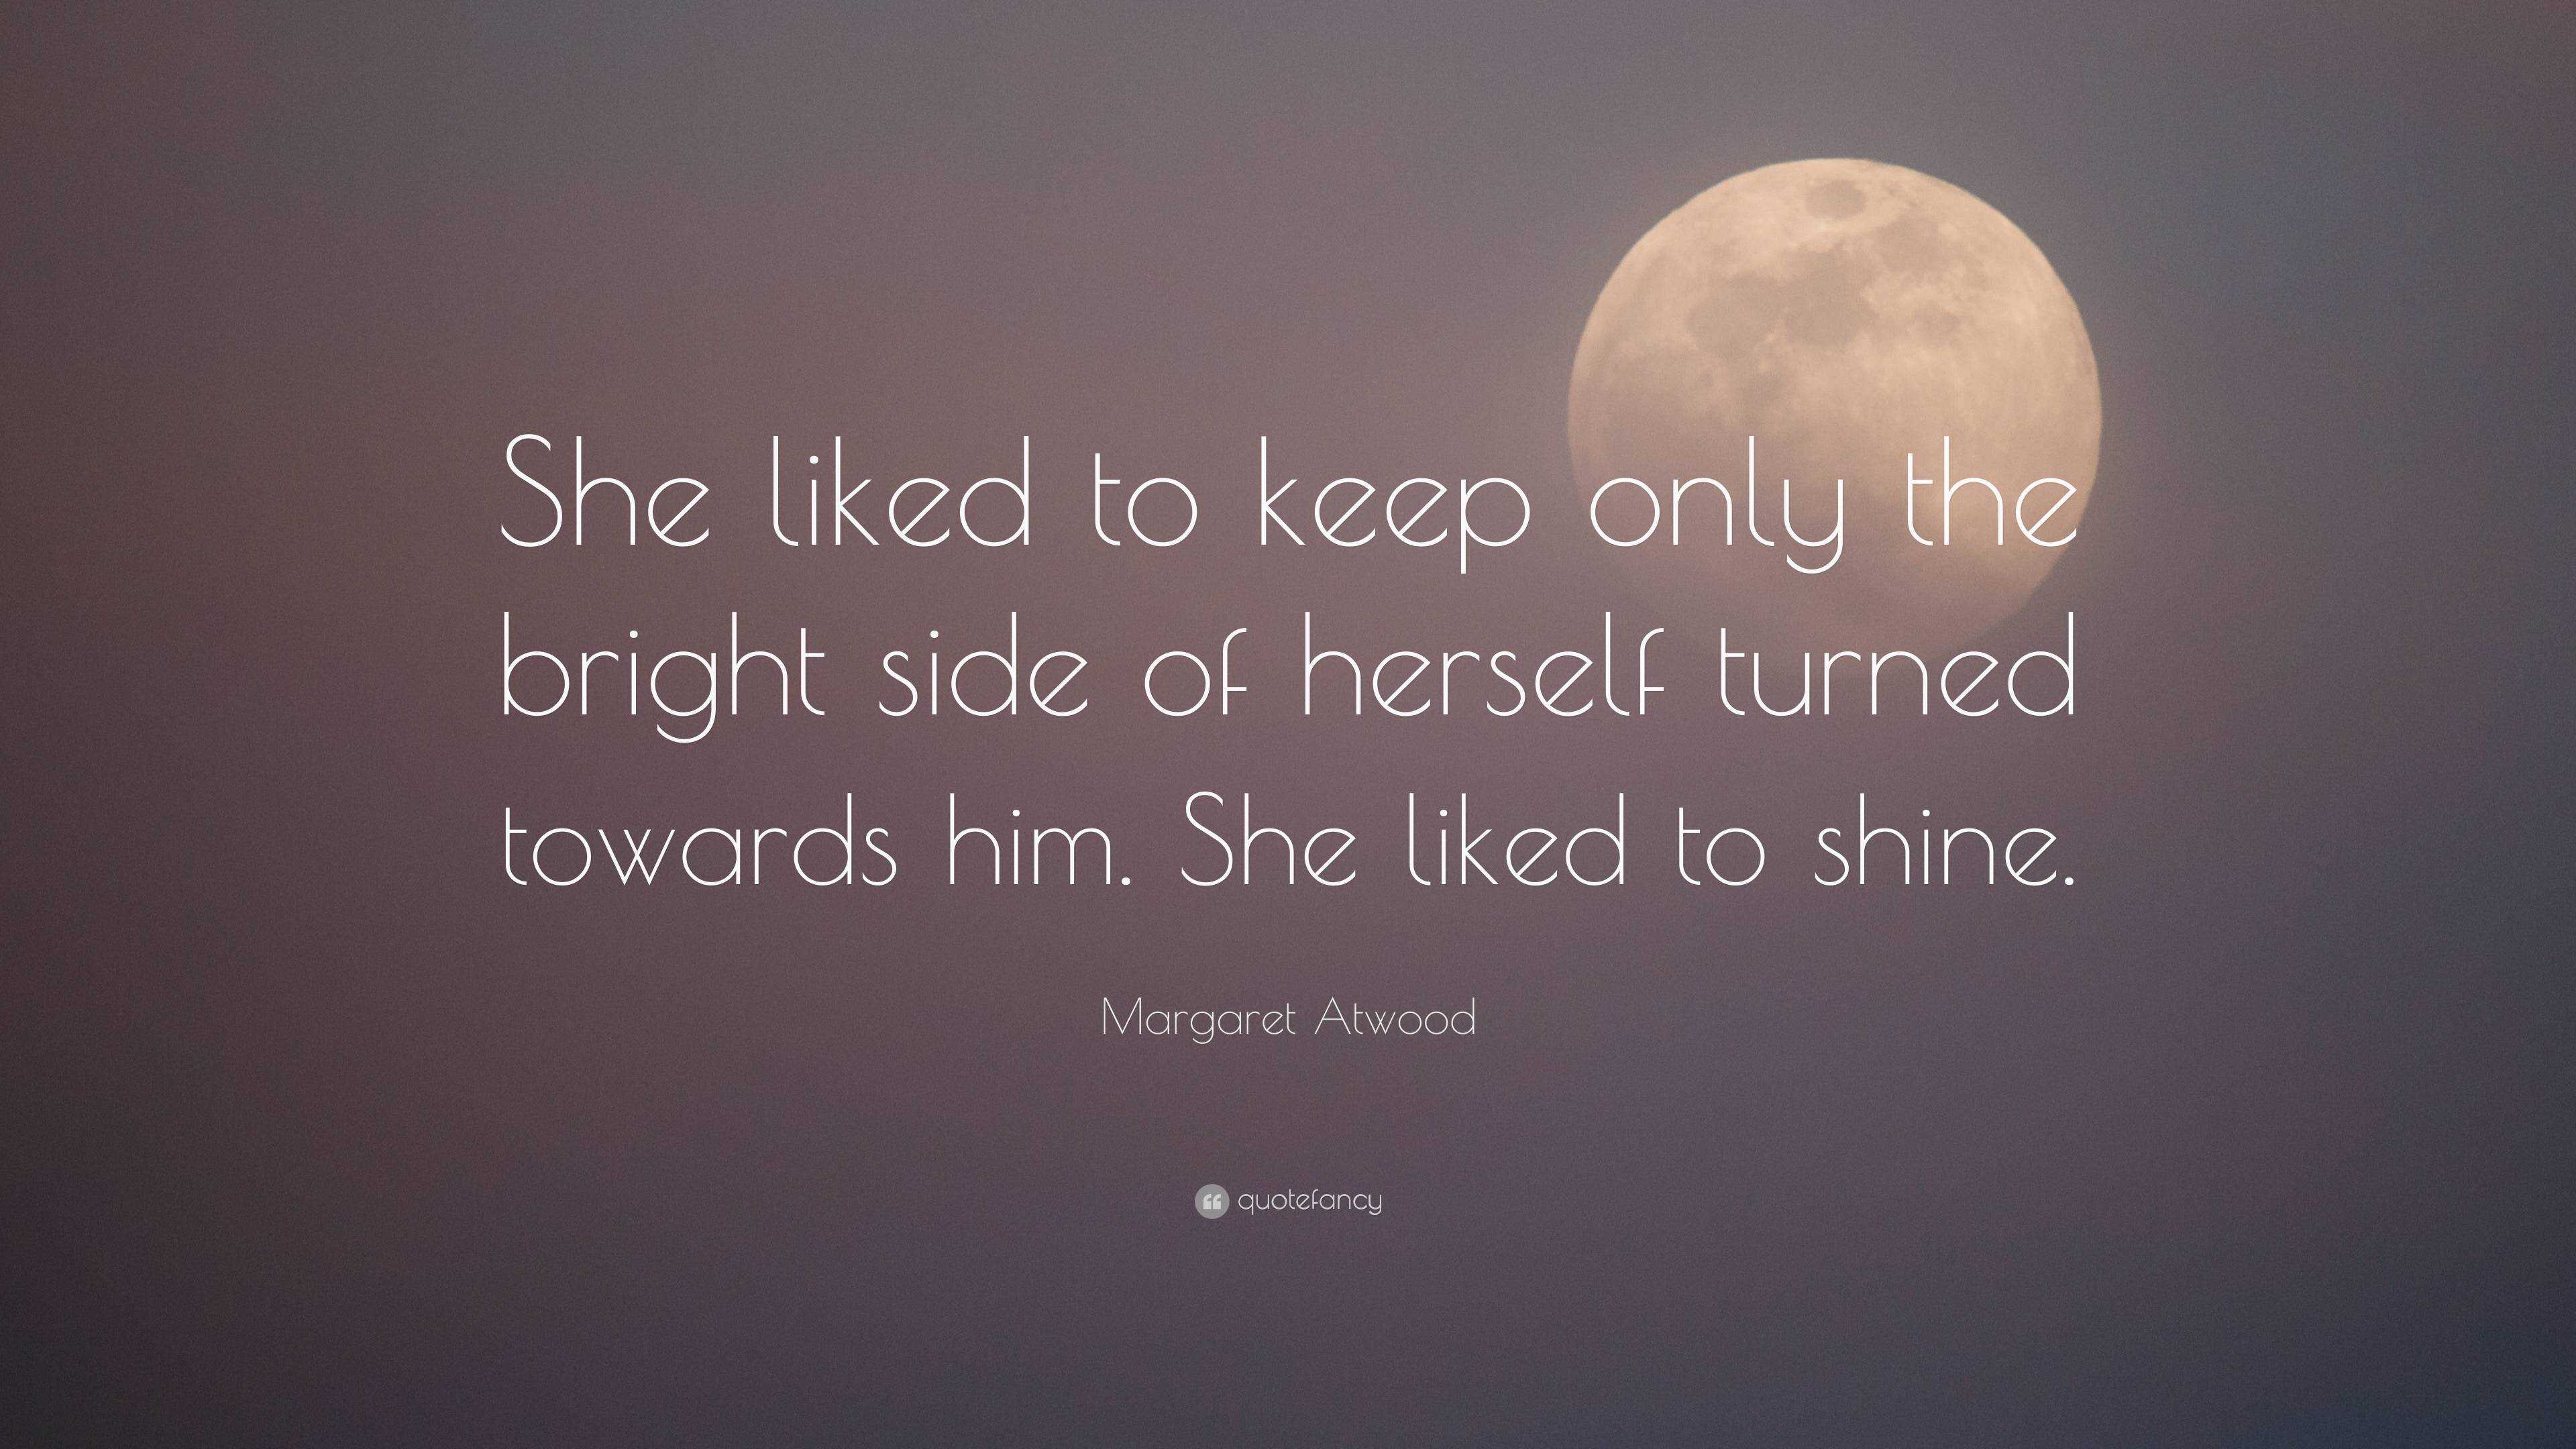 Margaret Atwood Quote: “She liked to keep only the bright side of ...